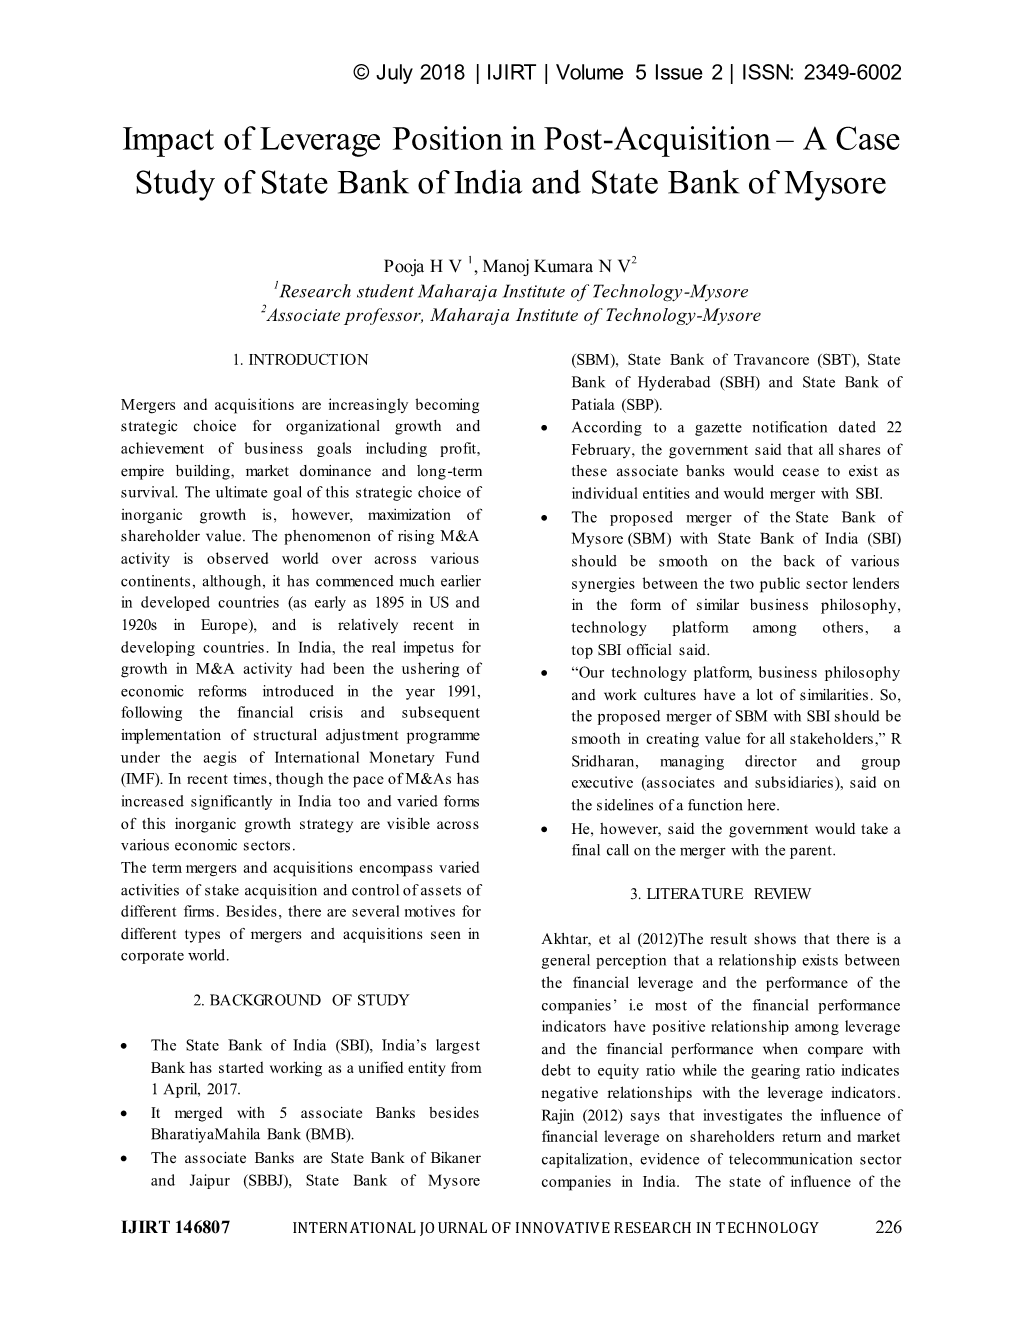 A Case Study of State Bank of India and State Bank of Mysore